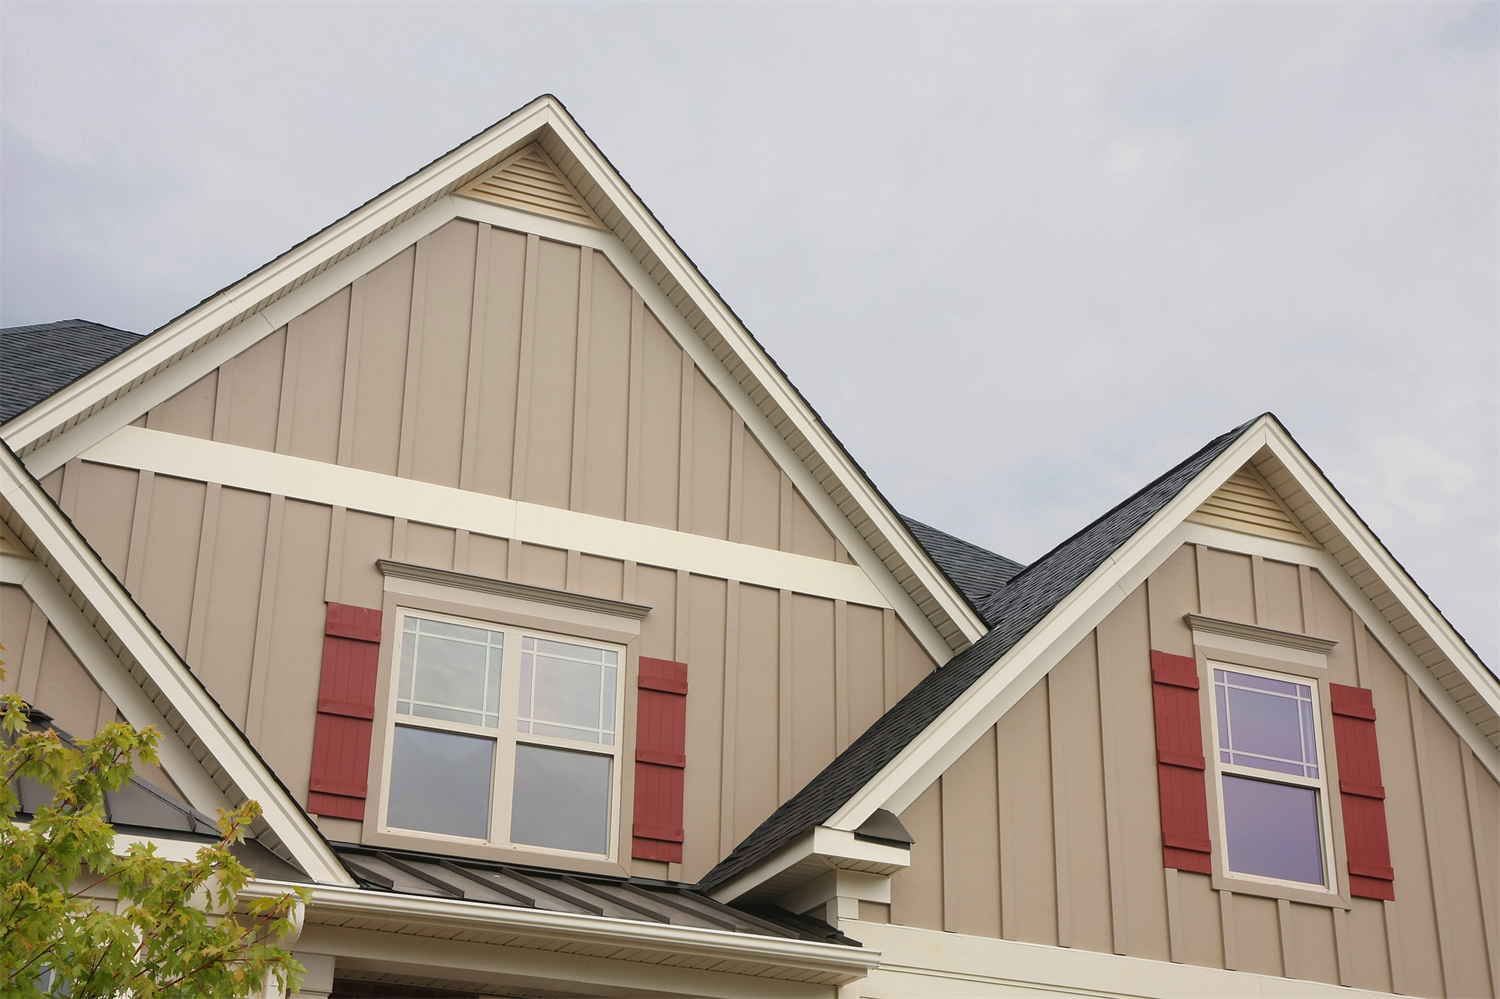 7 Types of Siding For a House